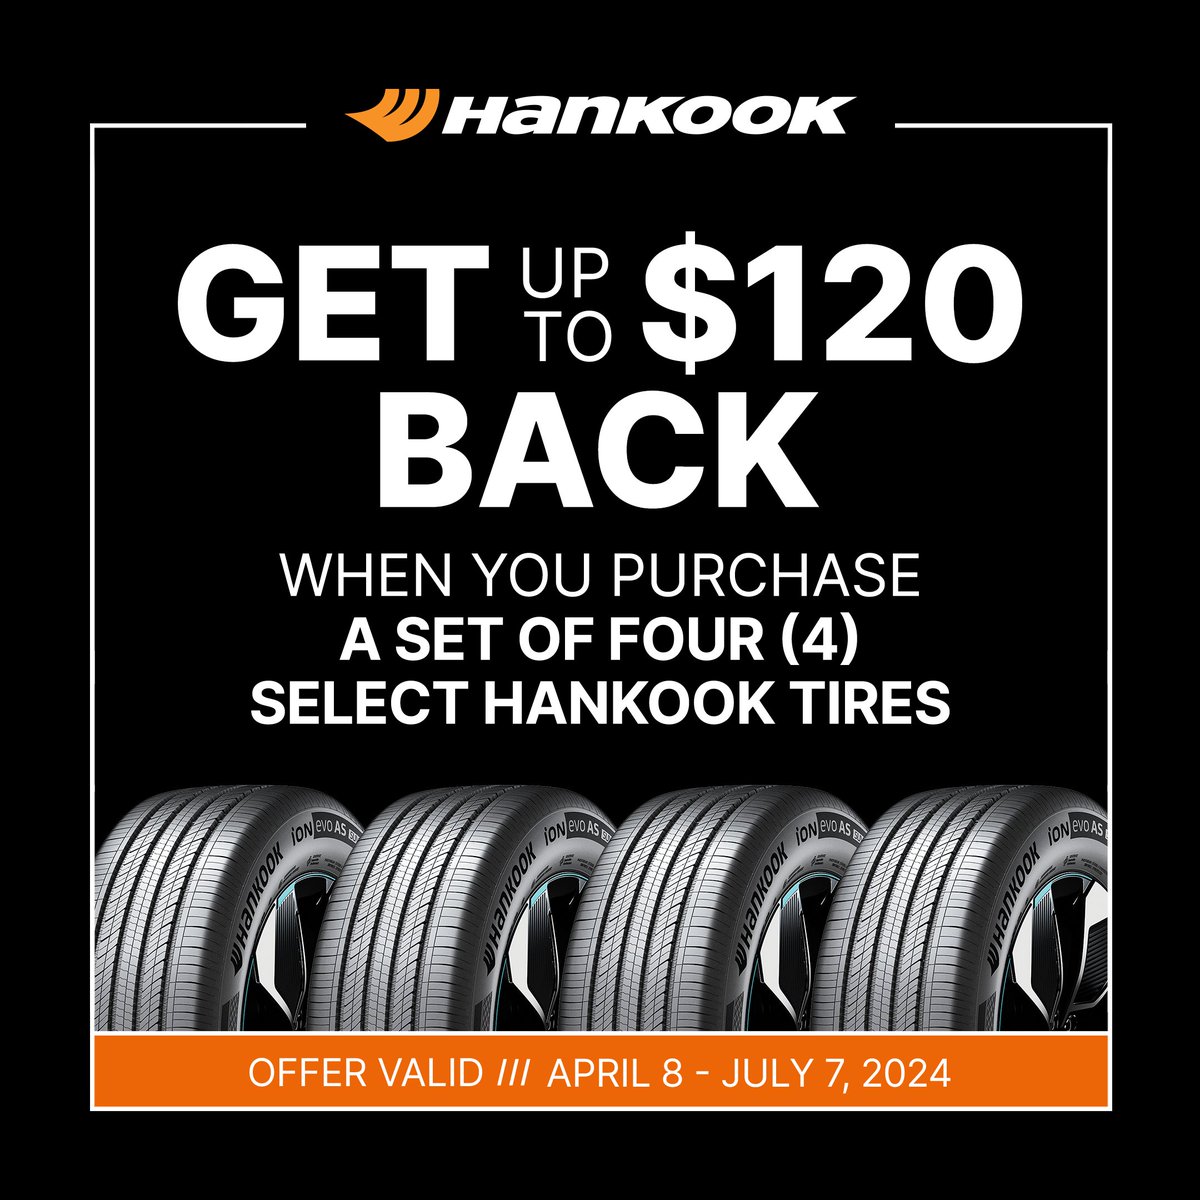 🎉🚗 Exciting news! Our latest deals have just landed! 😍 Save big on select tires from top brands like Goodyear, Hankook, Cooper, and Kumho! Don't miss out – shop now and score incredible savings while they last! 🛍️💰 tireagent.com/deals